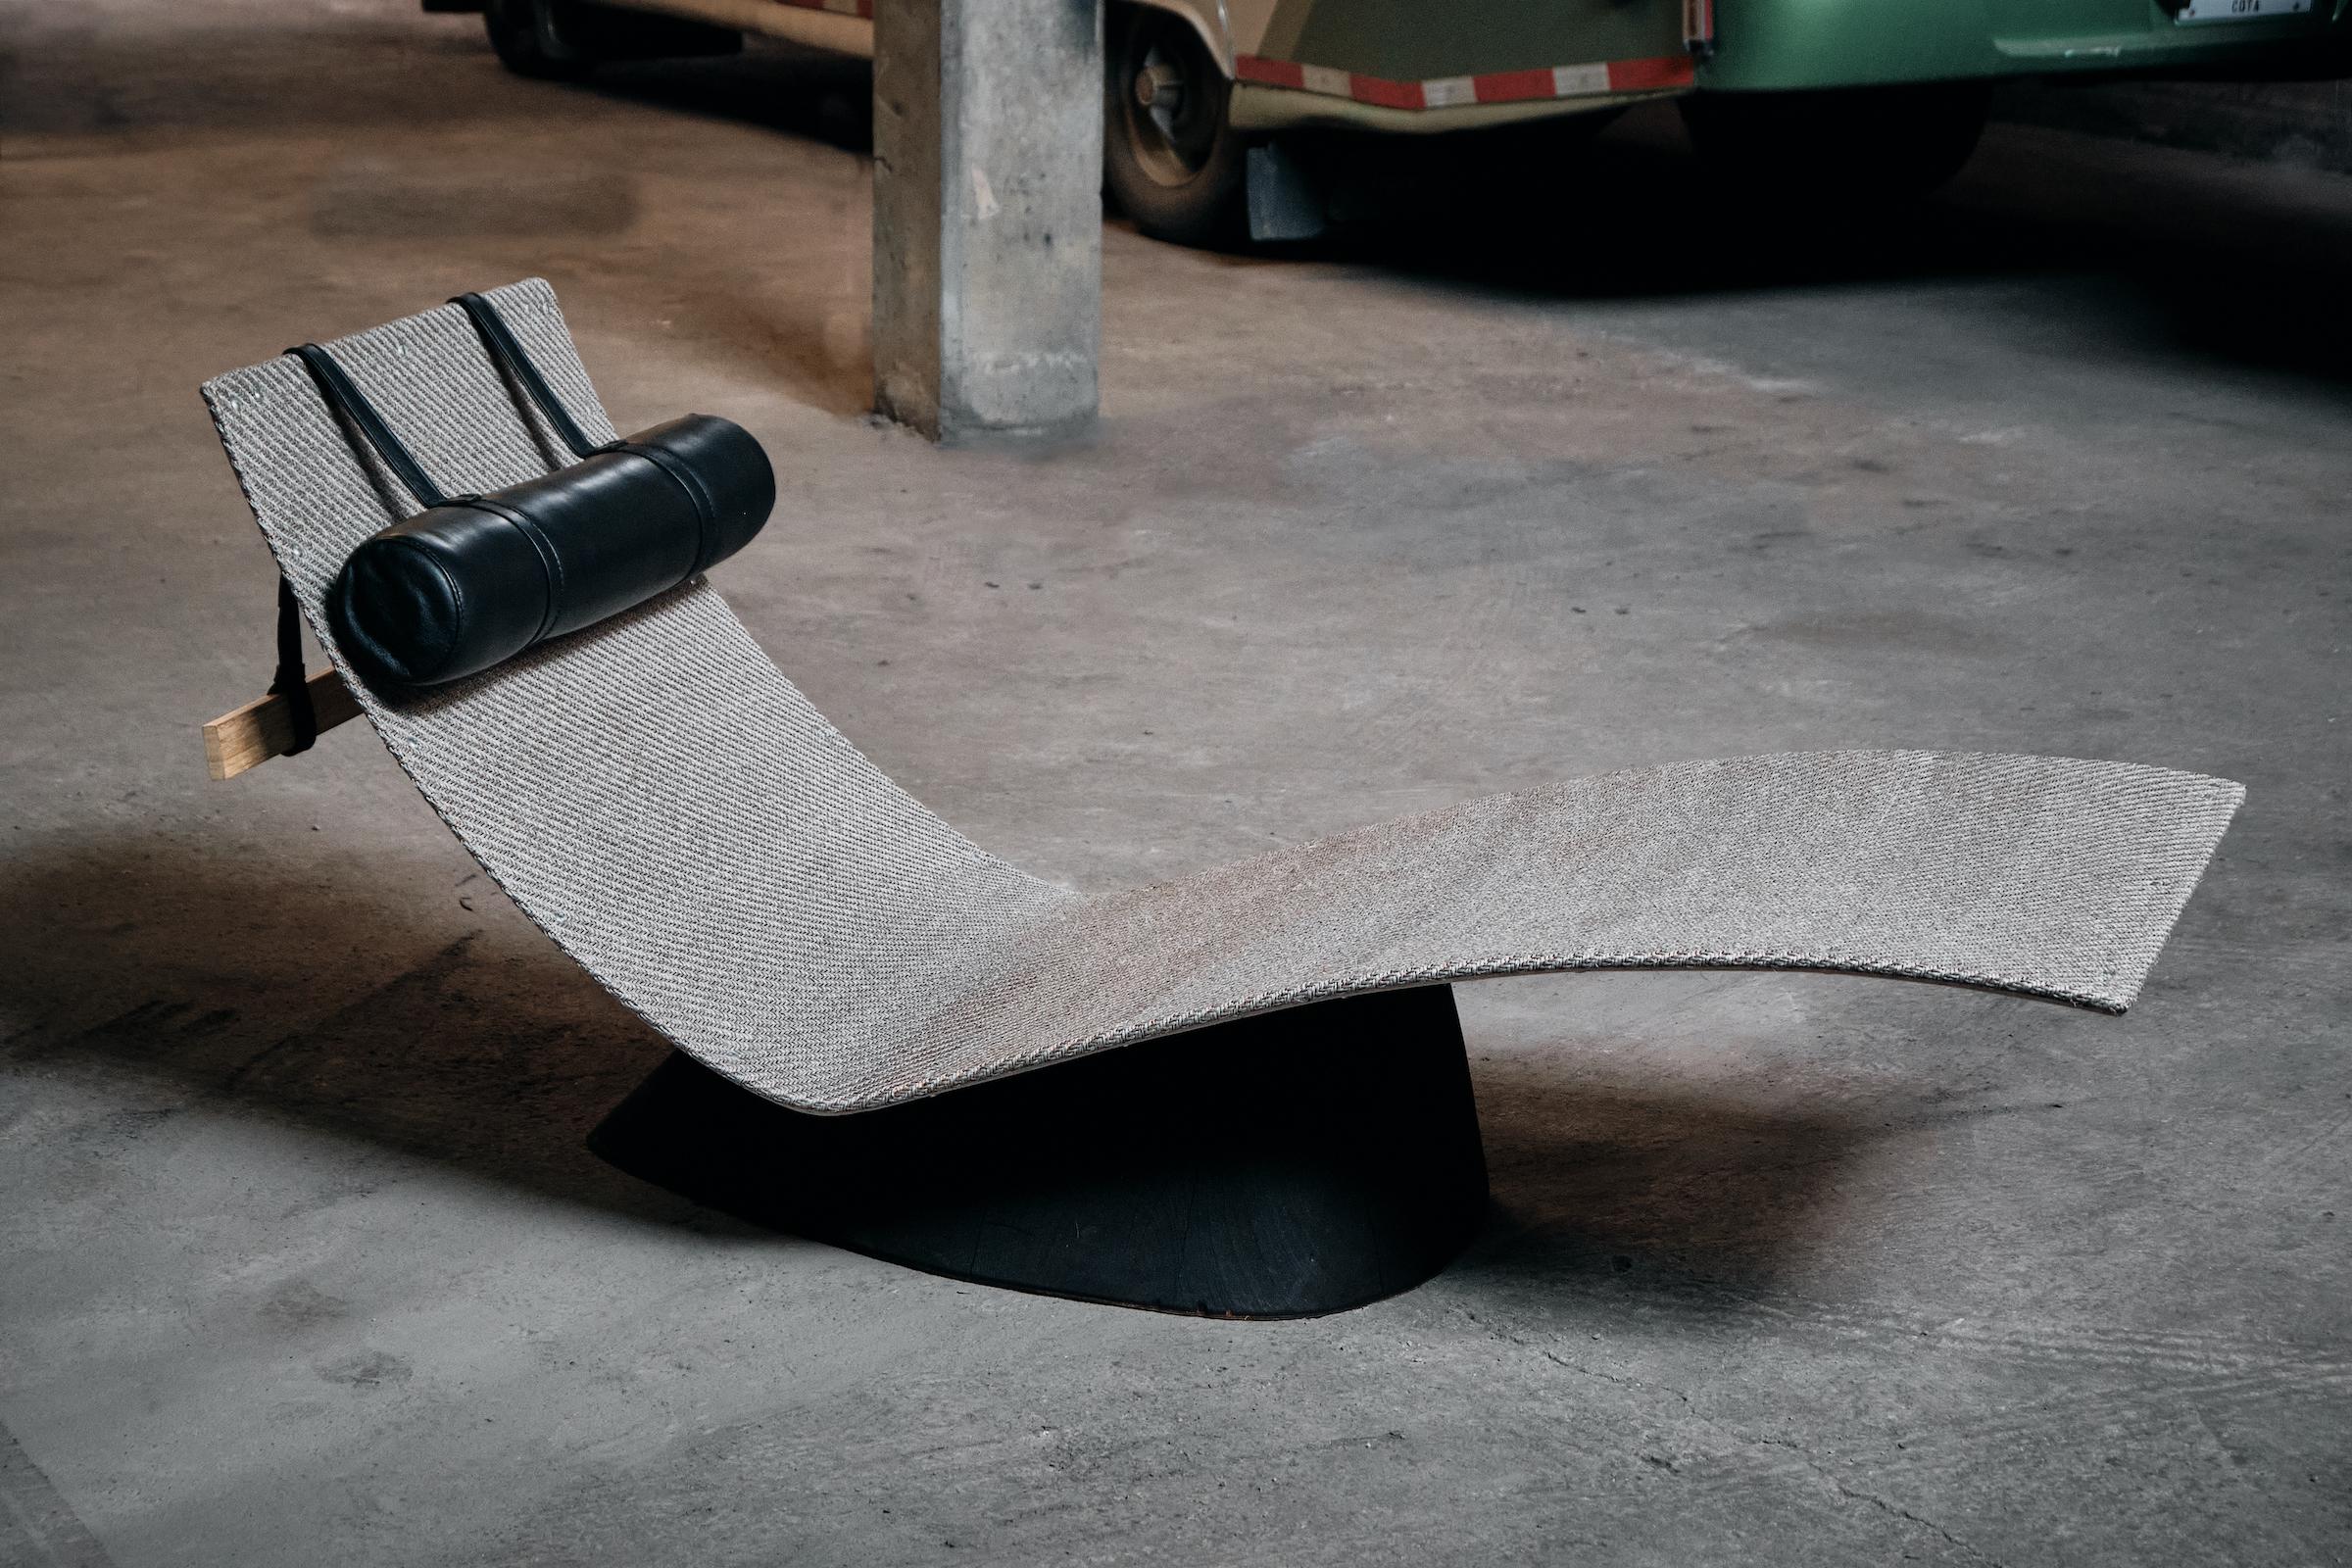 Chaise Longue Cherlon by Camilo Andres Rodriguez Marquez (aka CarmWorks)

Fique and copper fabric / Burnt wood or natural

Each piece is made to order and hand crafted by the artist.

Dimensions: H. 84 x 152 x 65 cm

--

Camilo Andres